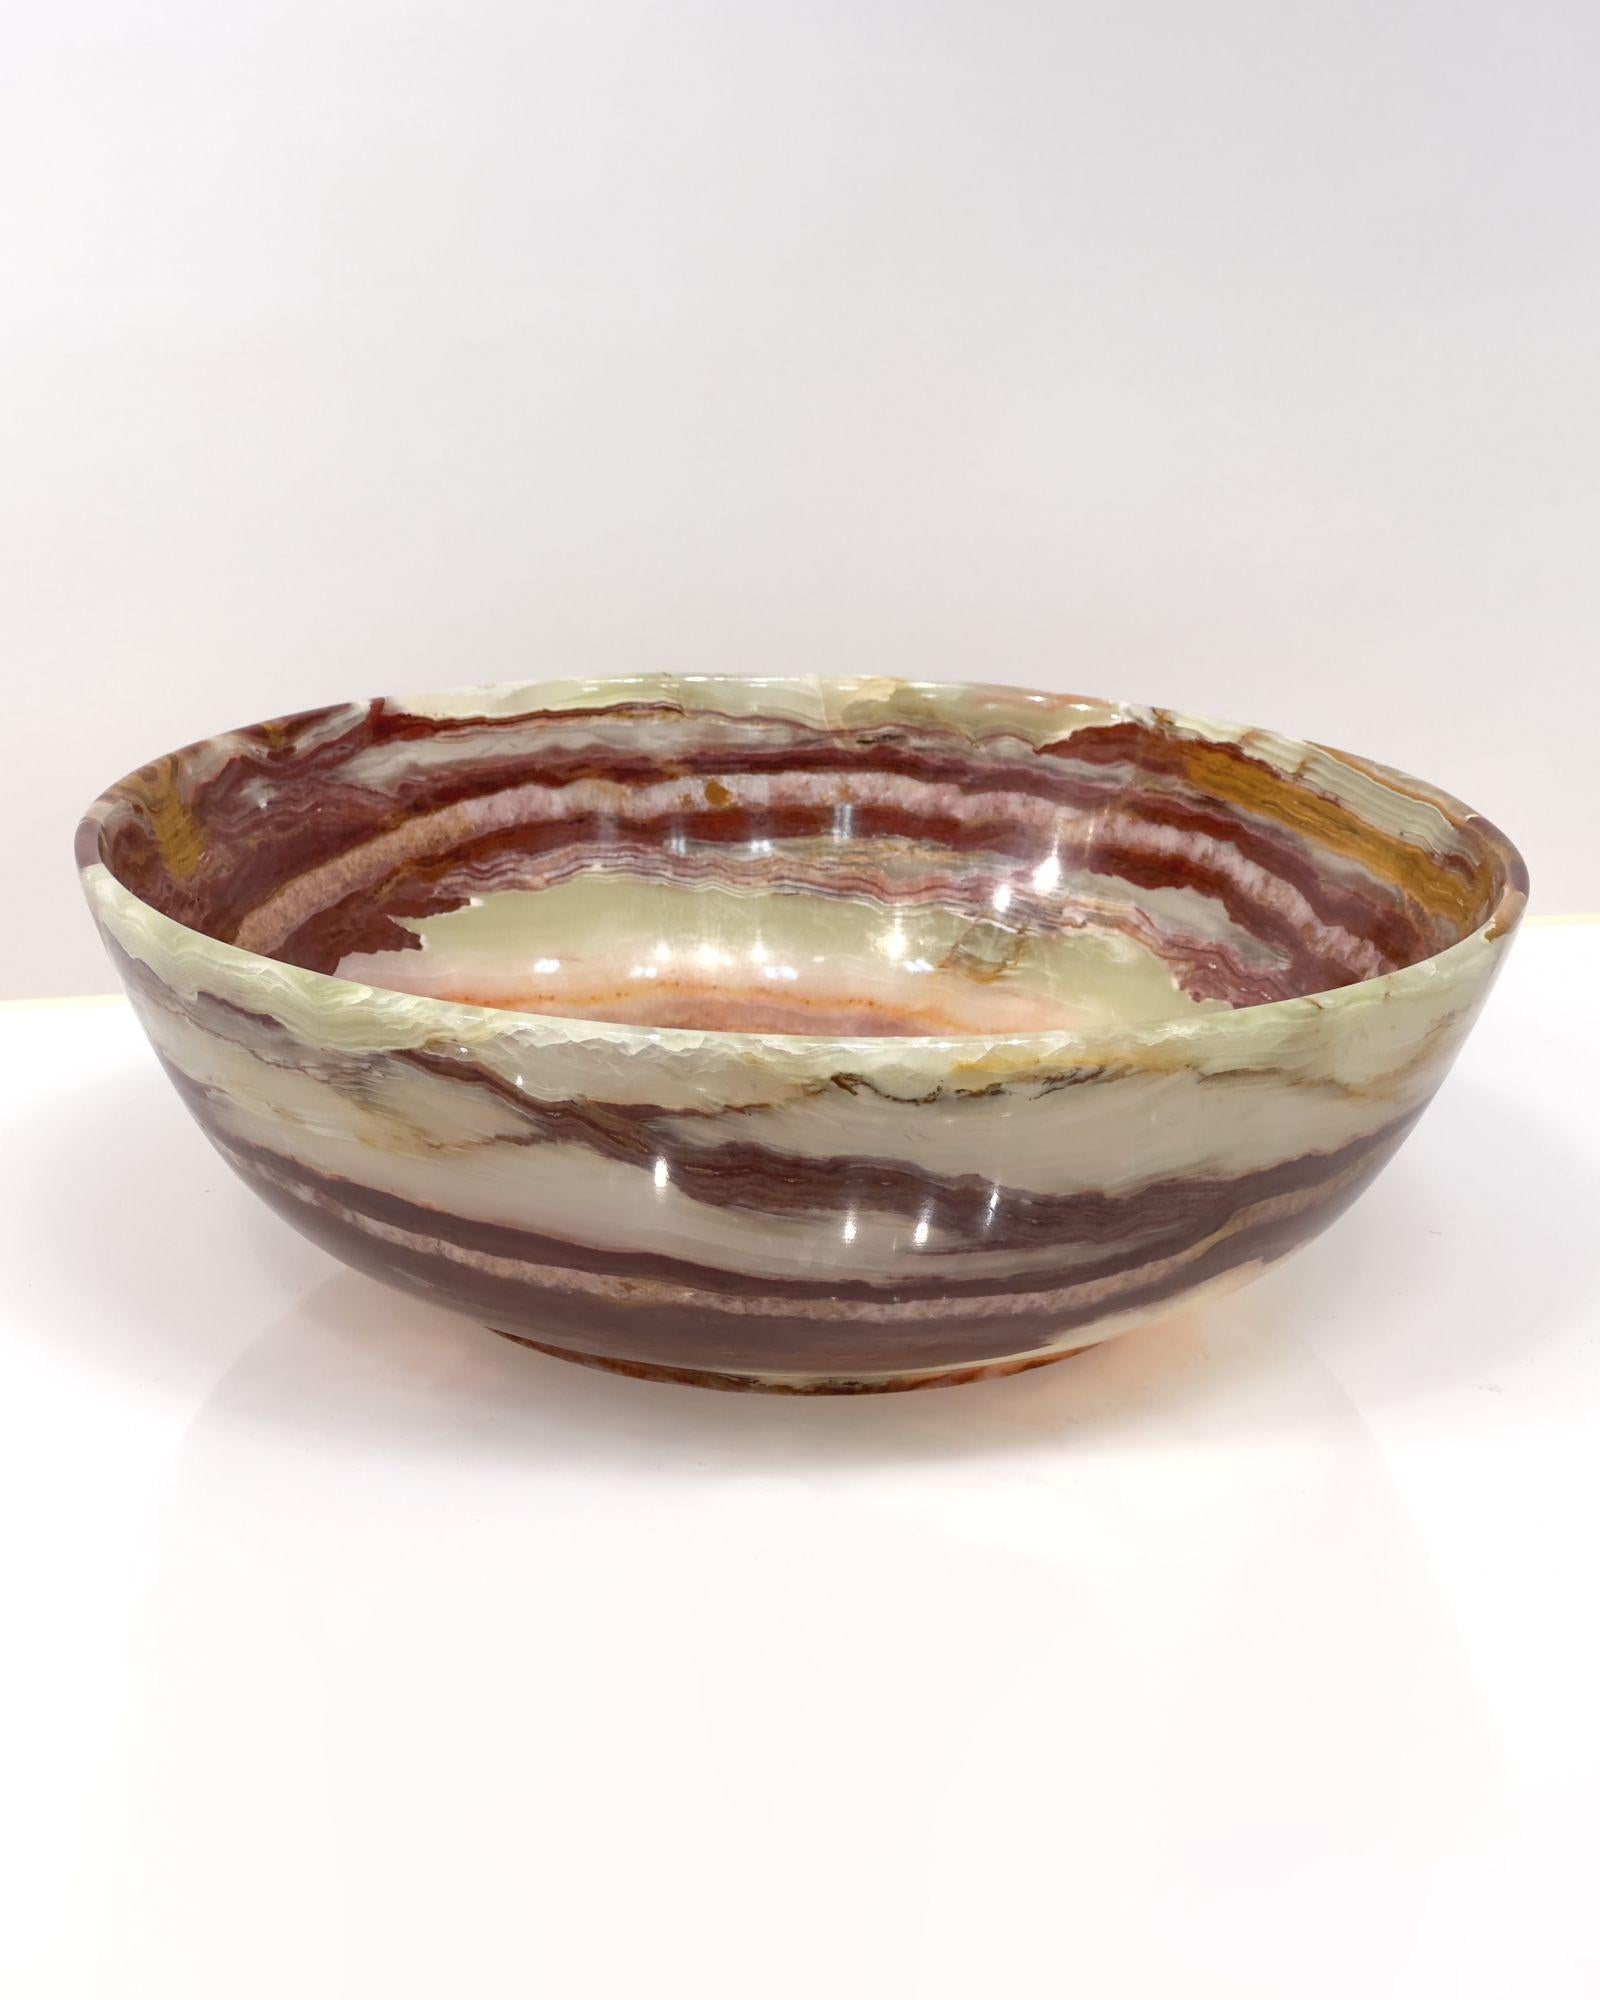 Polished Red Onyx Bowl, Mexico 1970. Excellent condition with no chips or cracks.
Measures 12